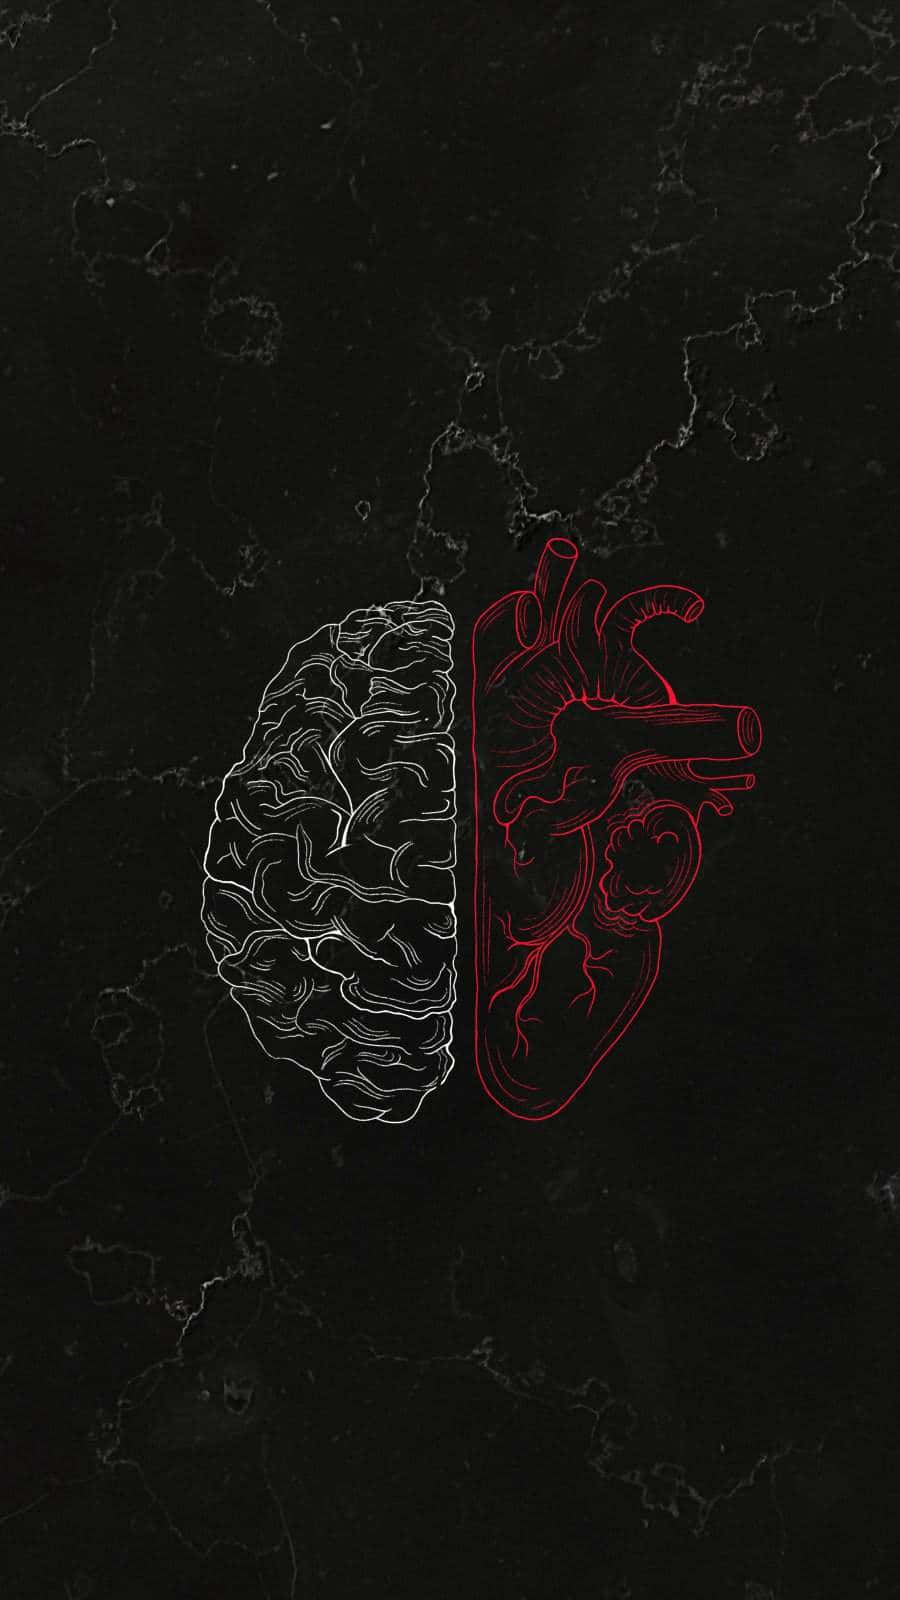 A Black And Red Heart And Brain On A Black Background